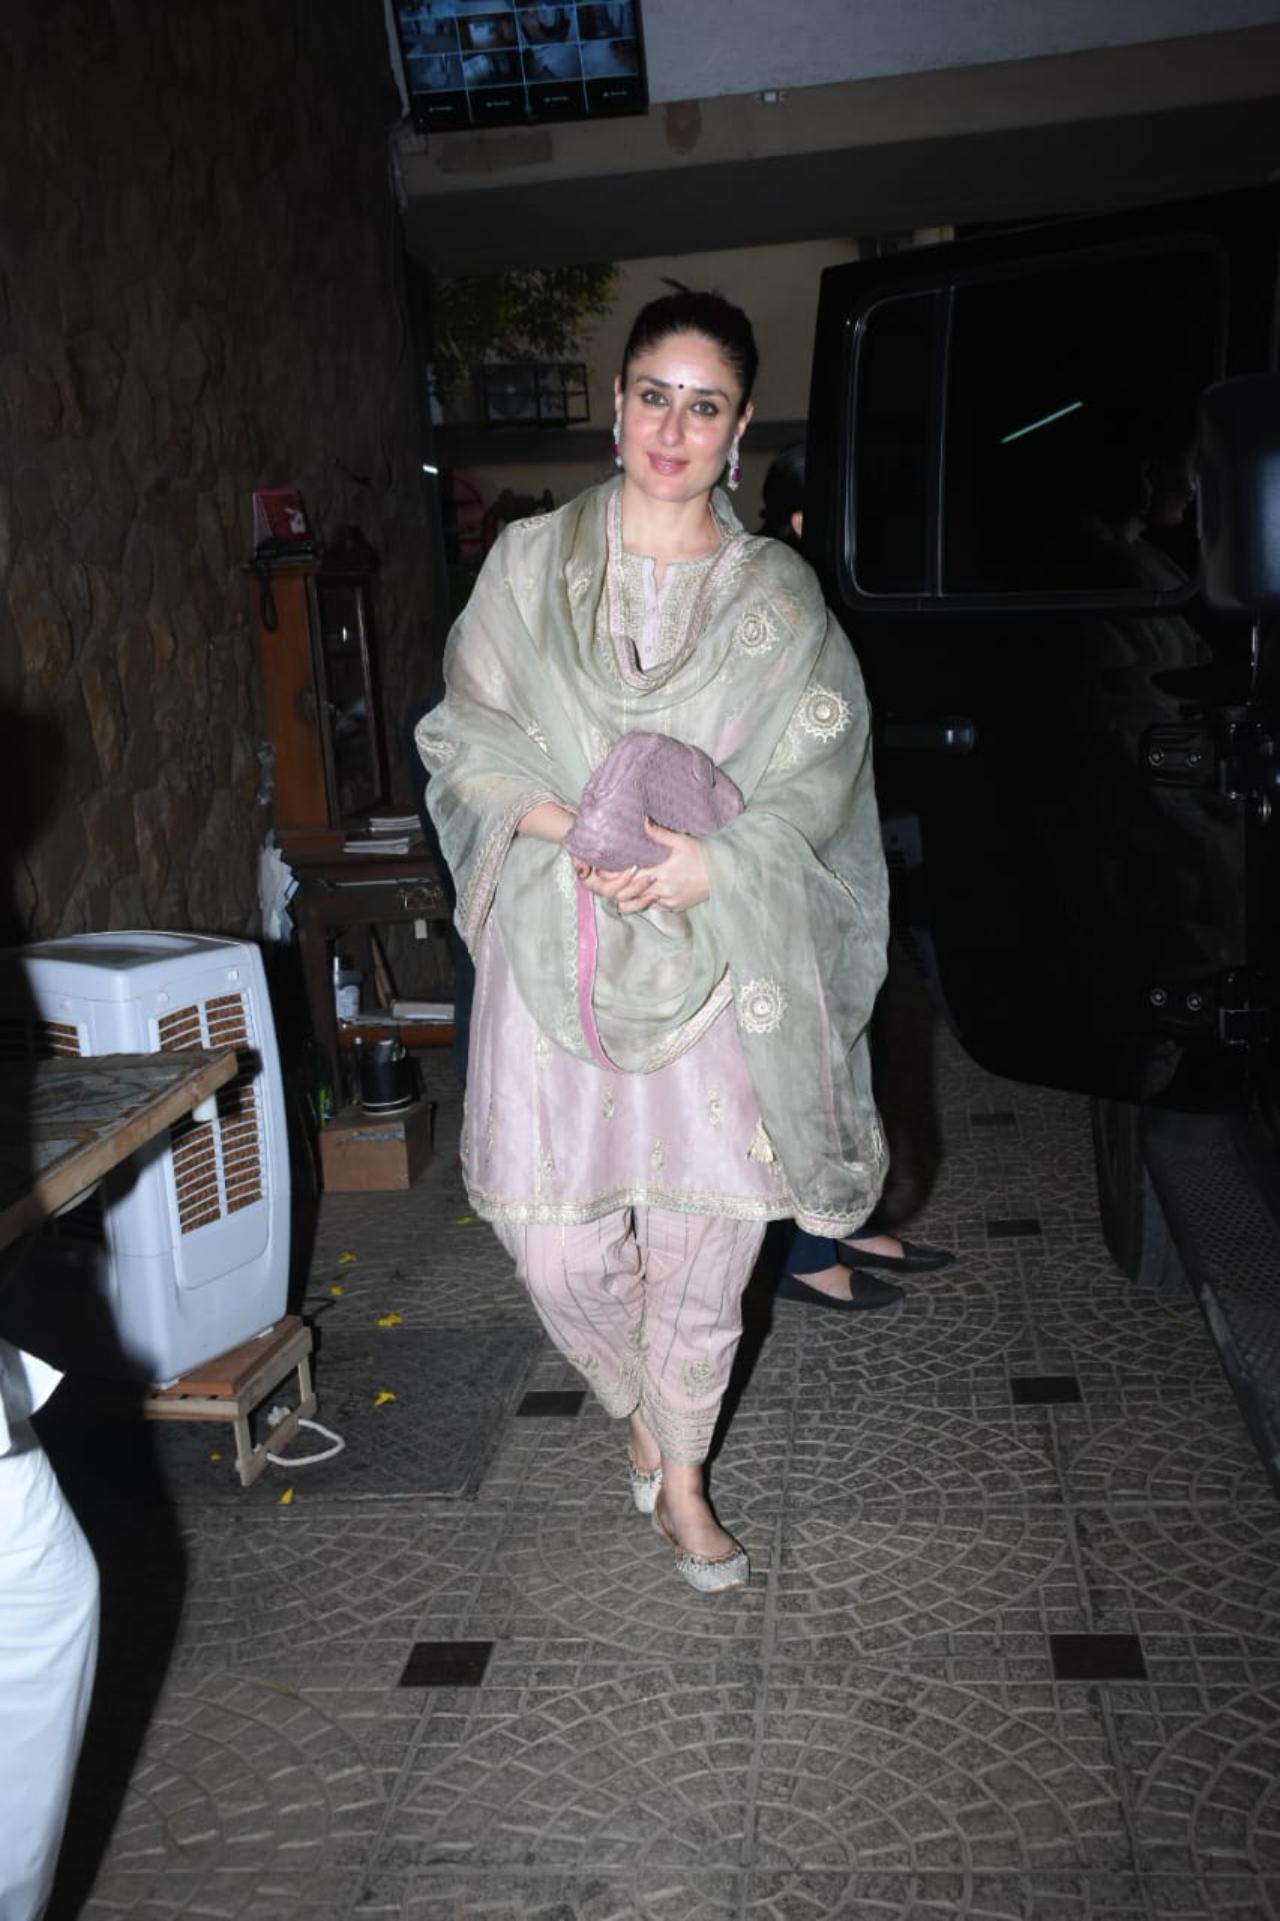 Kareena donned a grey-purple hinted suit for godh bharai, She paired the beautiful suit with a pair of matching juttis, and a mauve-coloured clutch. The actor kept her hair tied back in a bun. Kareena opted for a bindi and ruby diamond earrings to complete her ethnic look